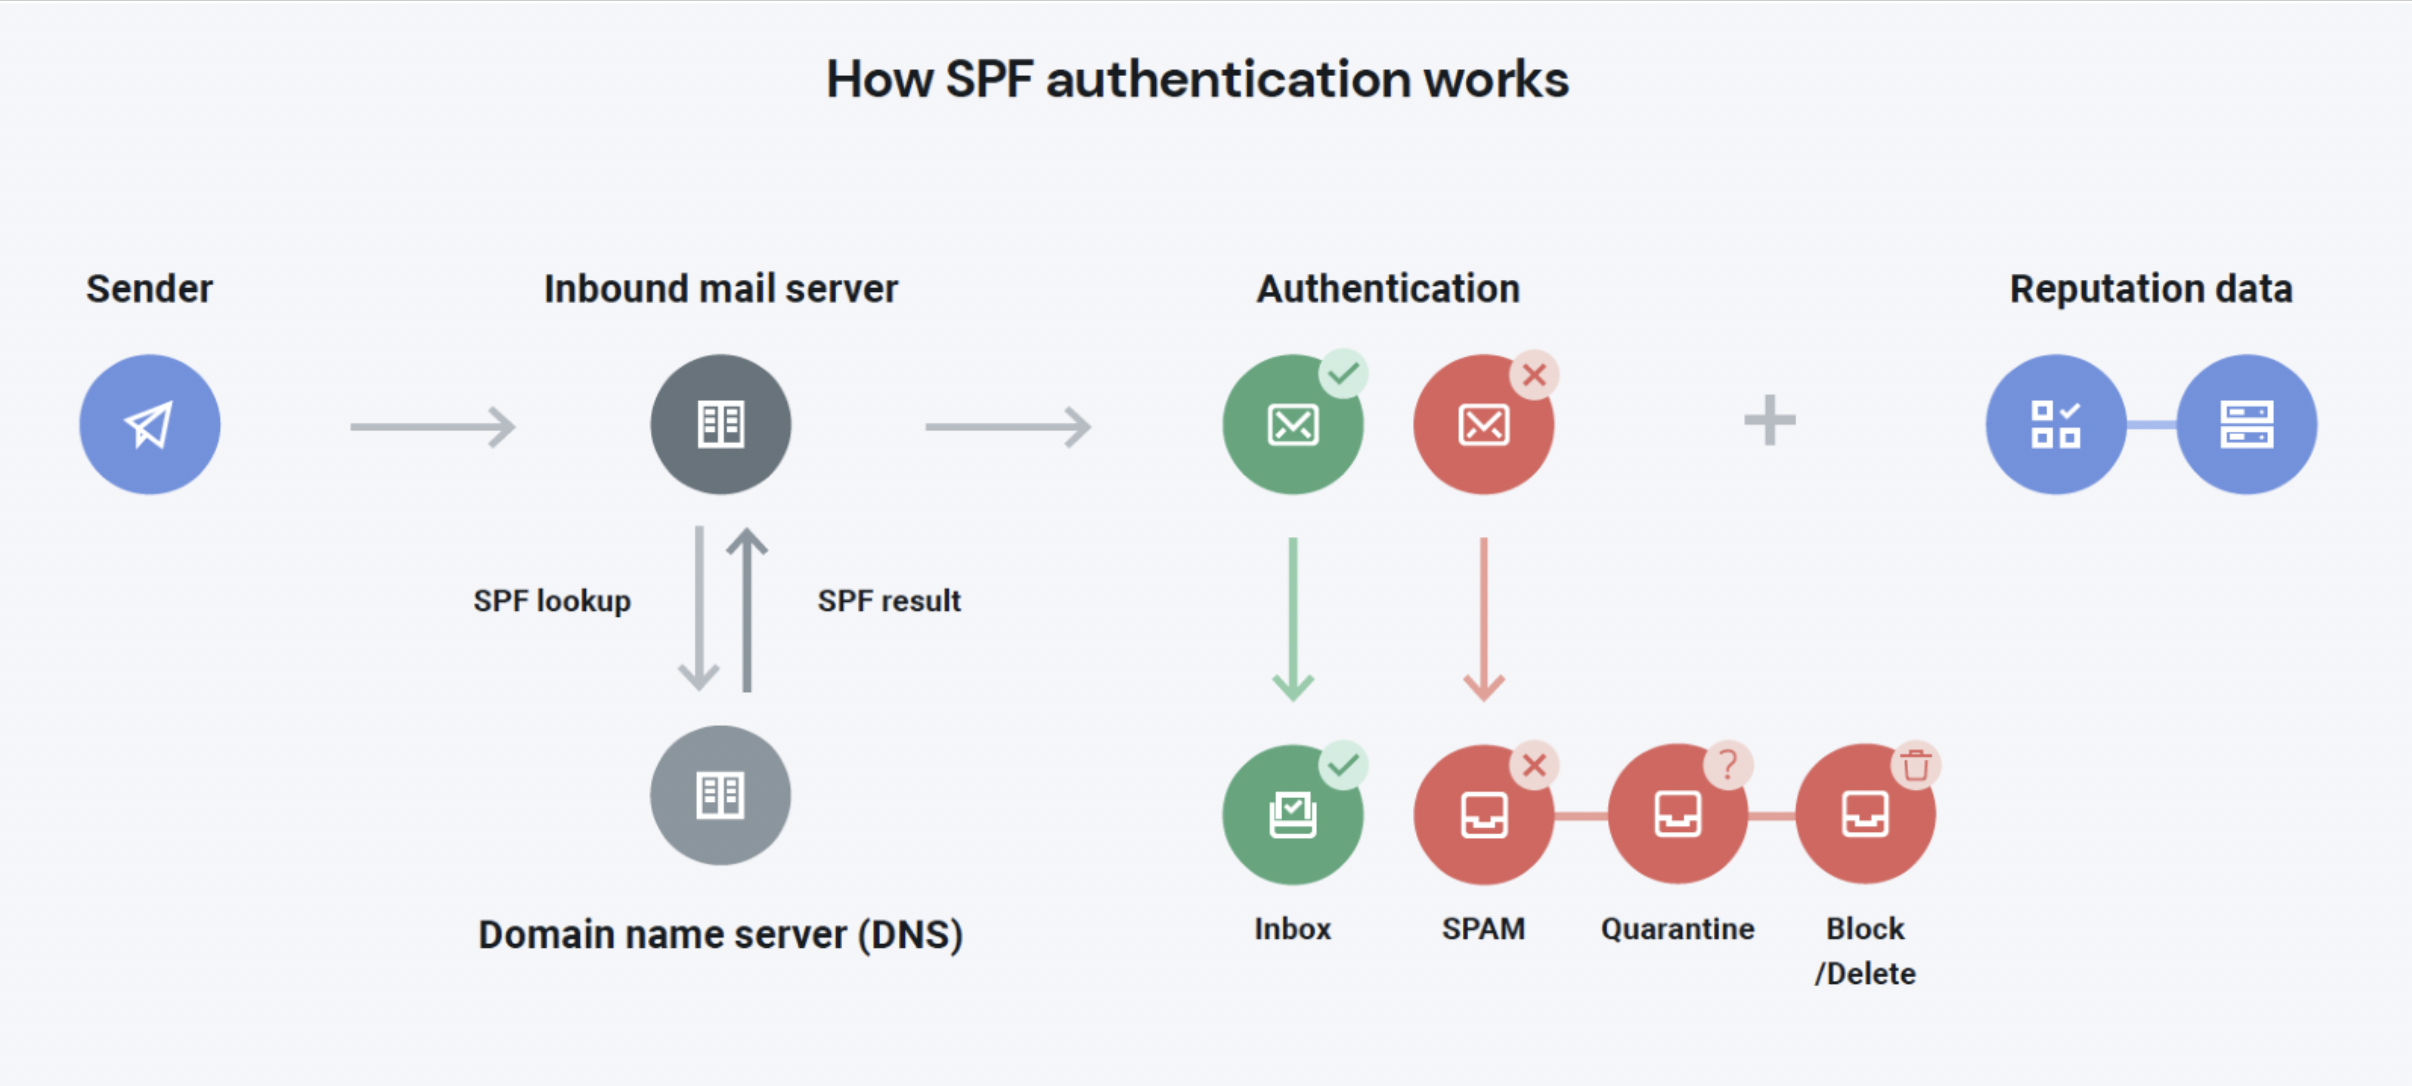 Image shows the SPF authentication flow from the sender, to the inbound mail server and DNS, to the authentication policy.